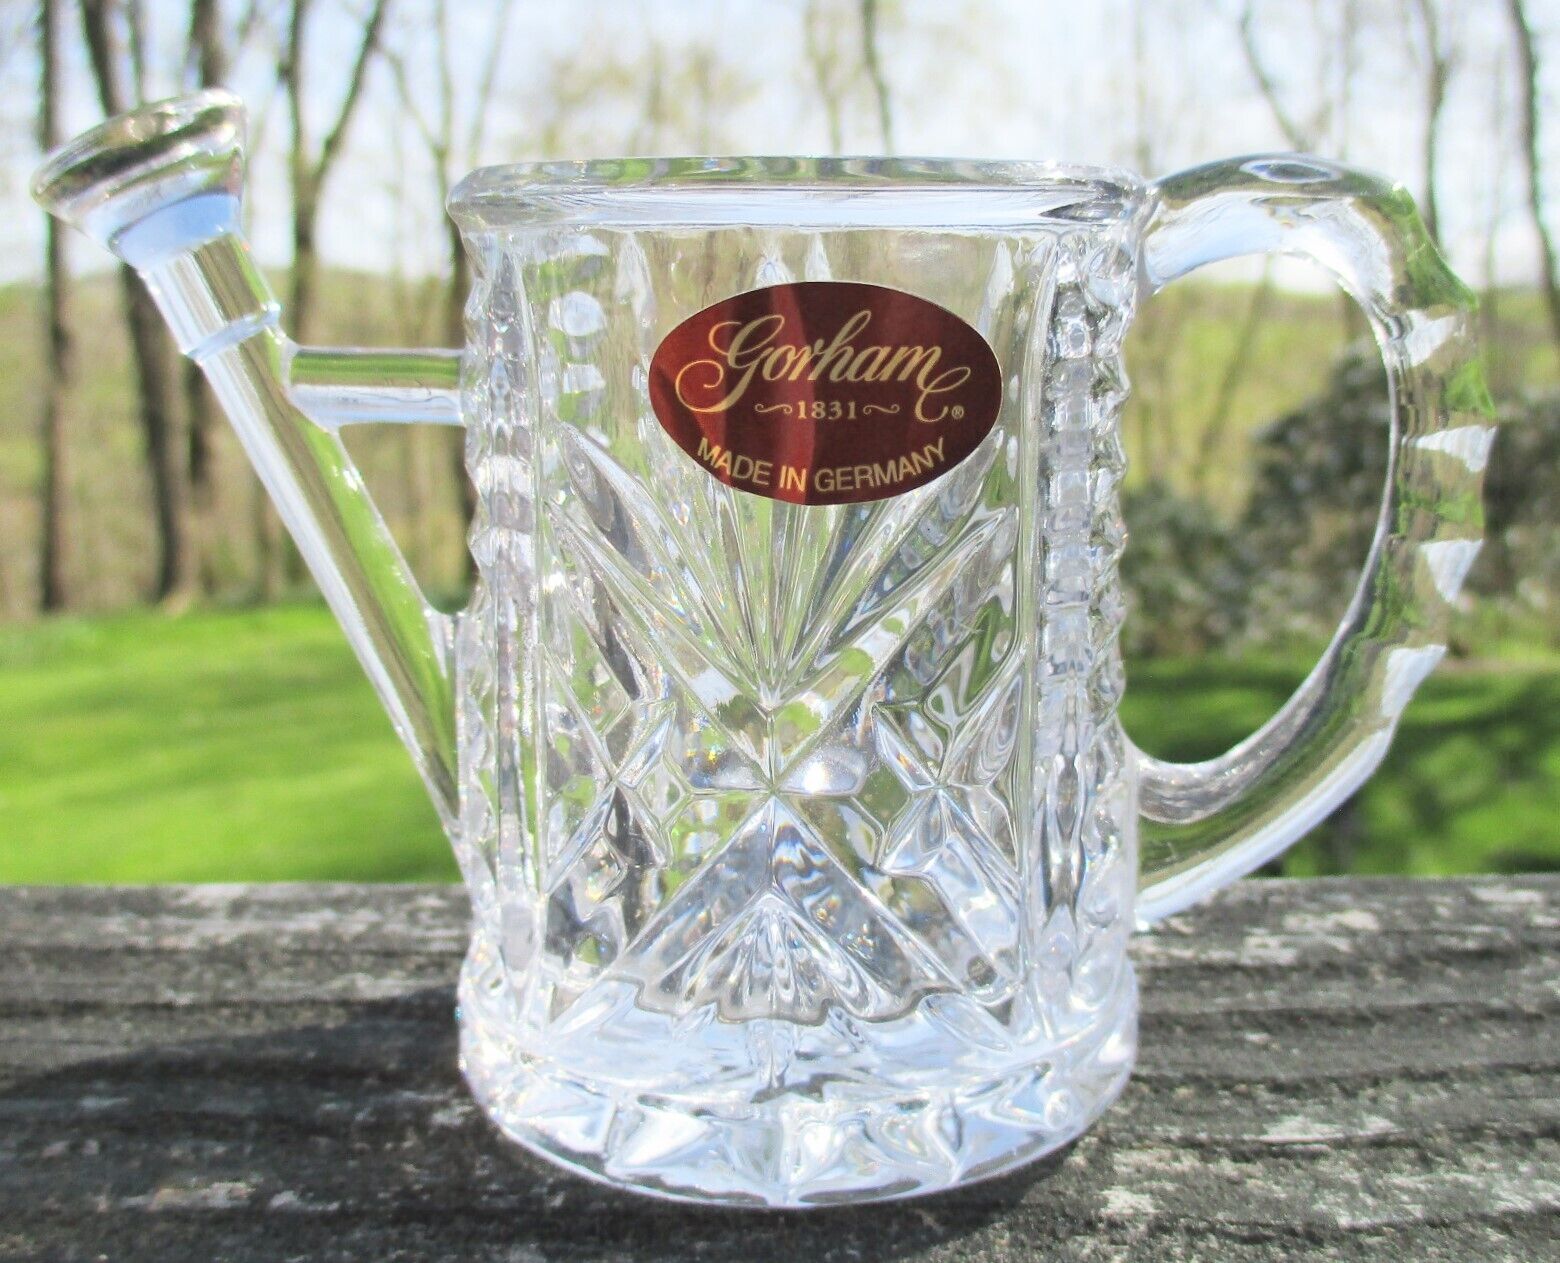 Gorham Crystal Watering Can Toothpick Holder or Small Flower Vase with label